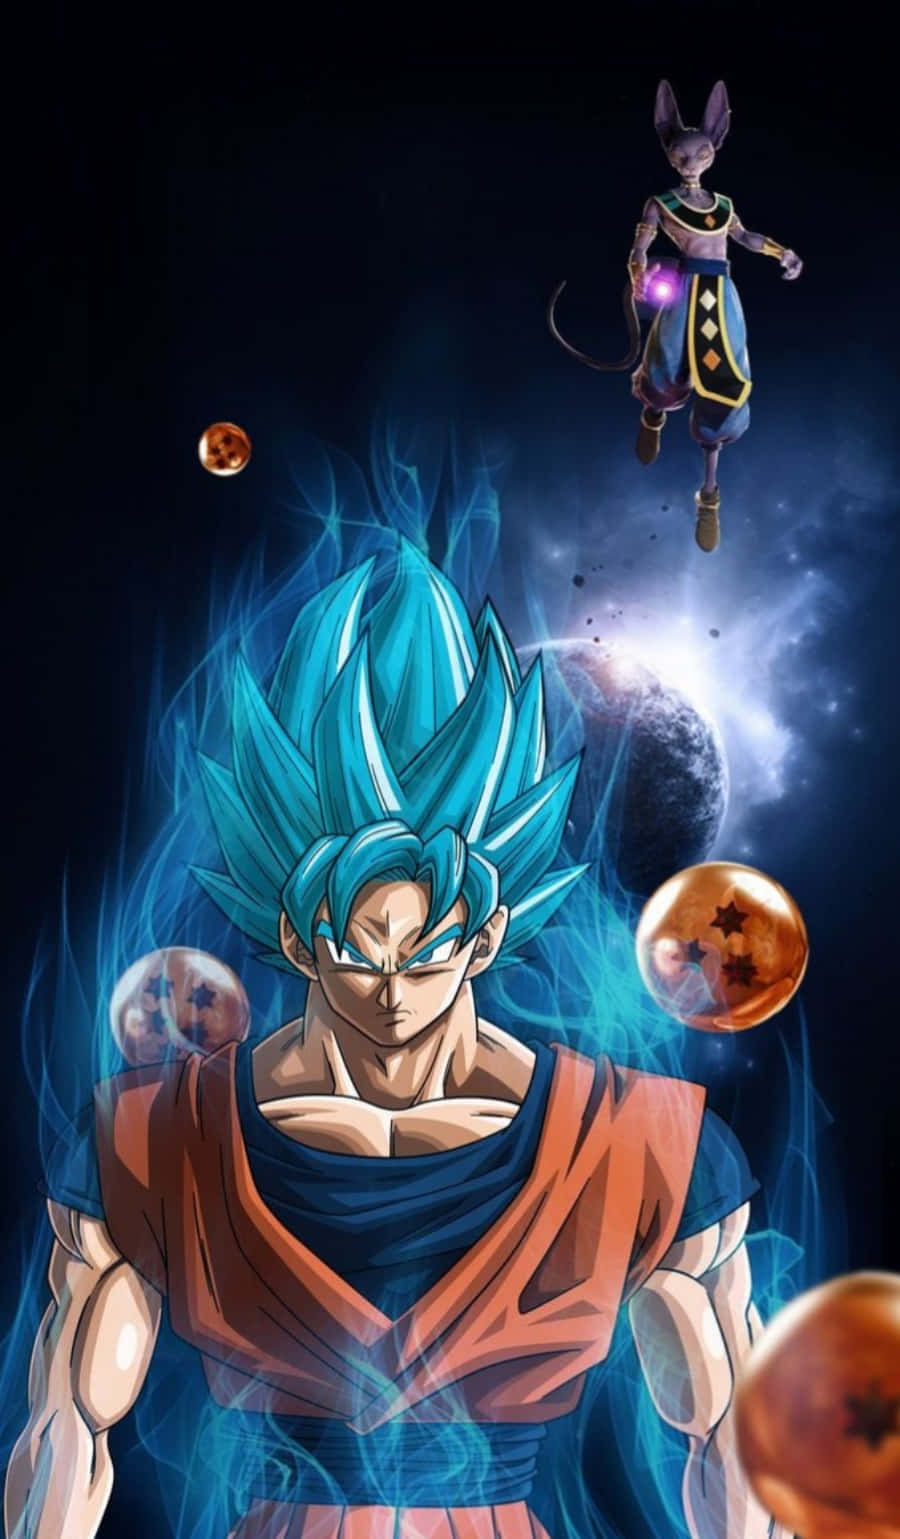 Unlock the power of the Dragon Ball Super universe on the all new iPhone Wallpaper